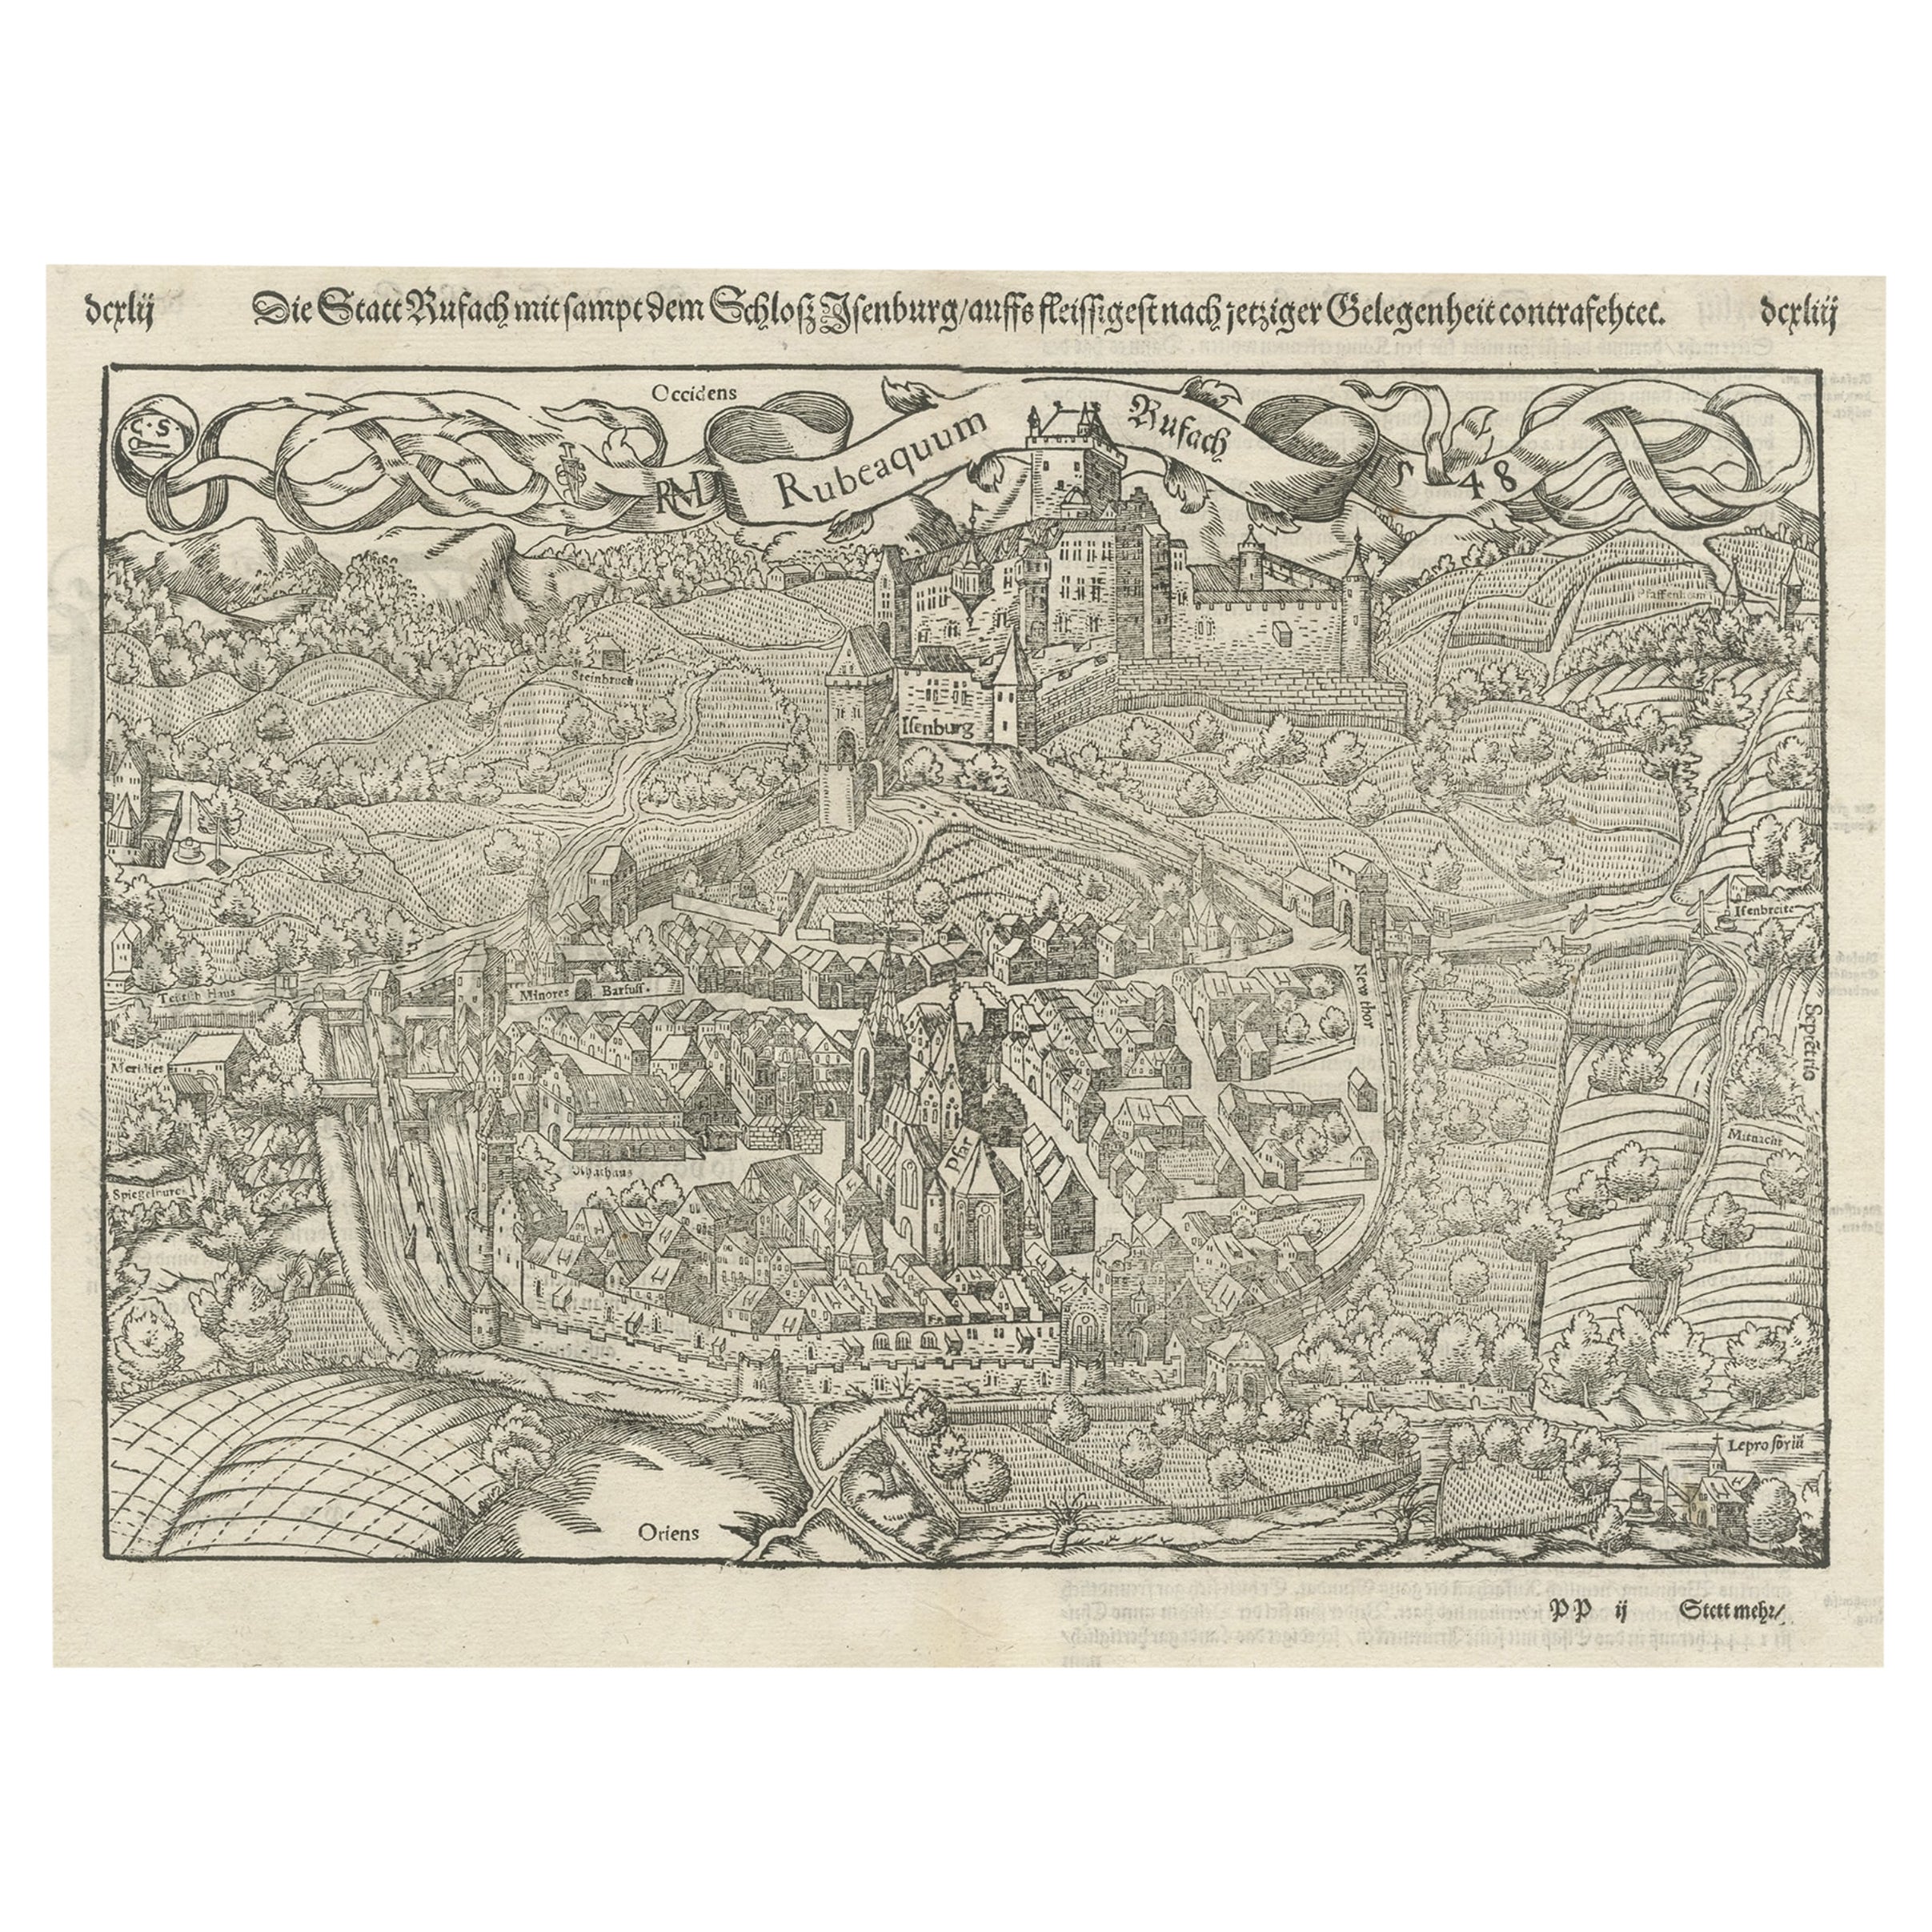 Original Antique Plan of Rouffach, France, with Chateau d'Isenbourgh, 1588 For Sale